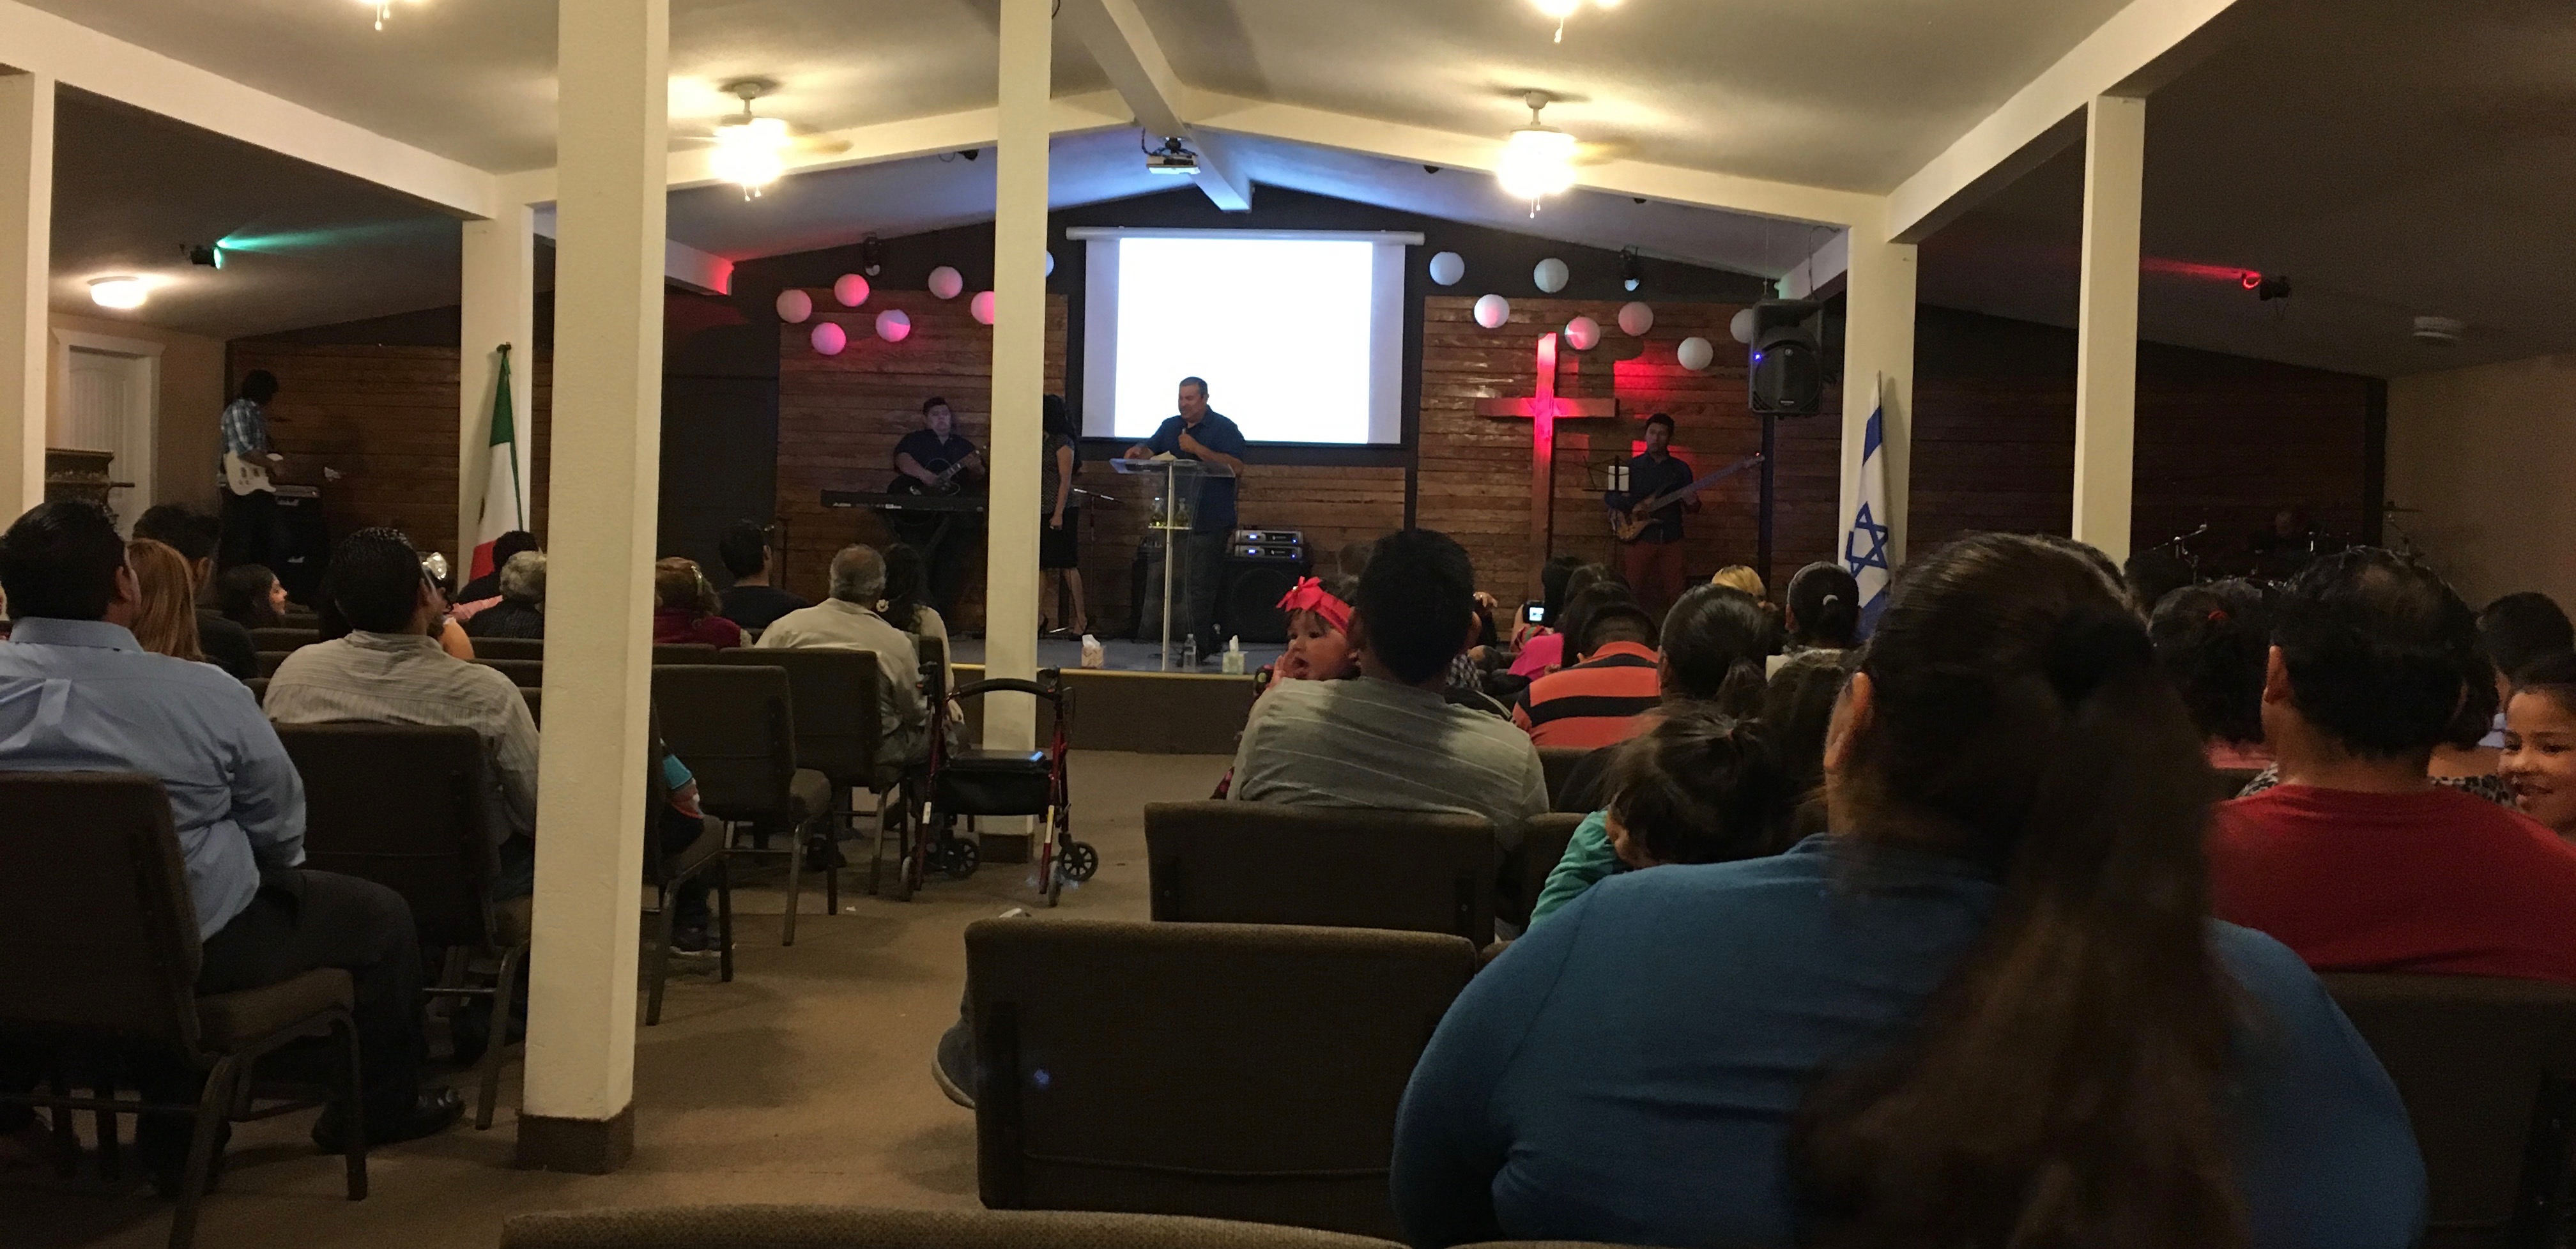 Pastor Daniel Nuñez leading the missions service for Ministerios Transformación